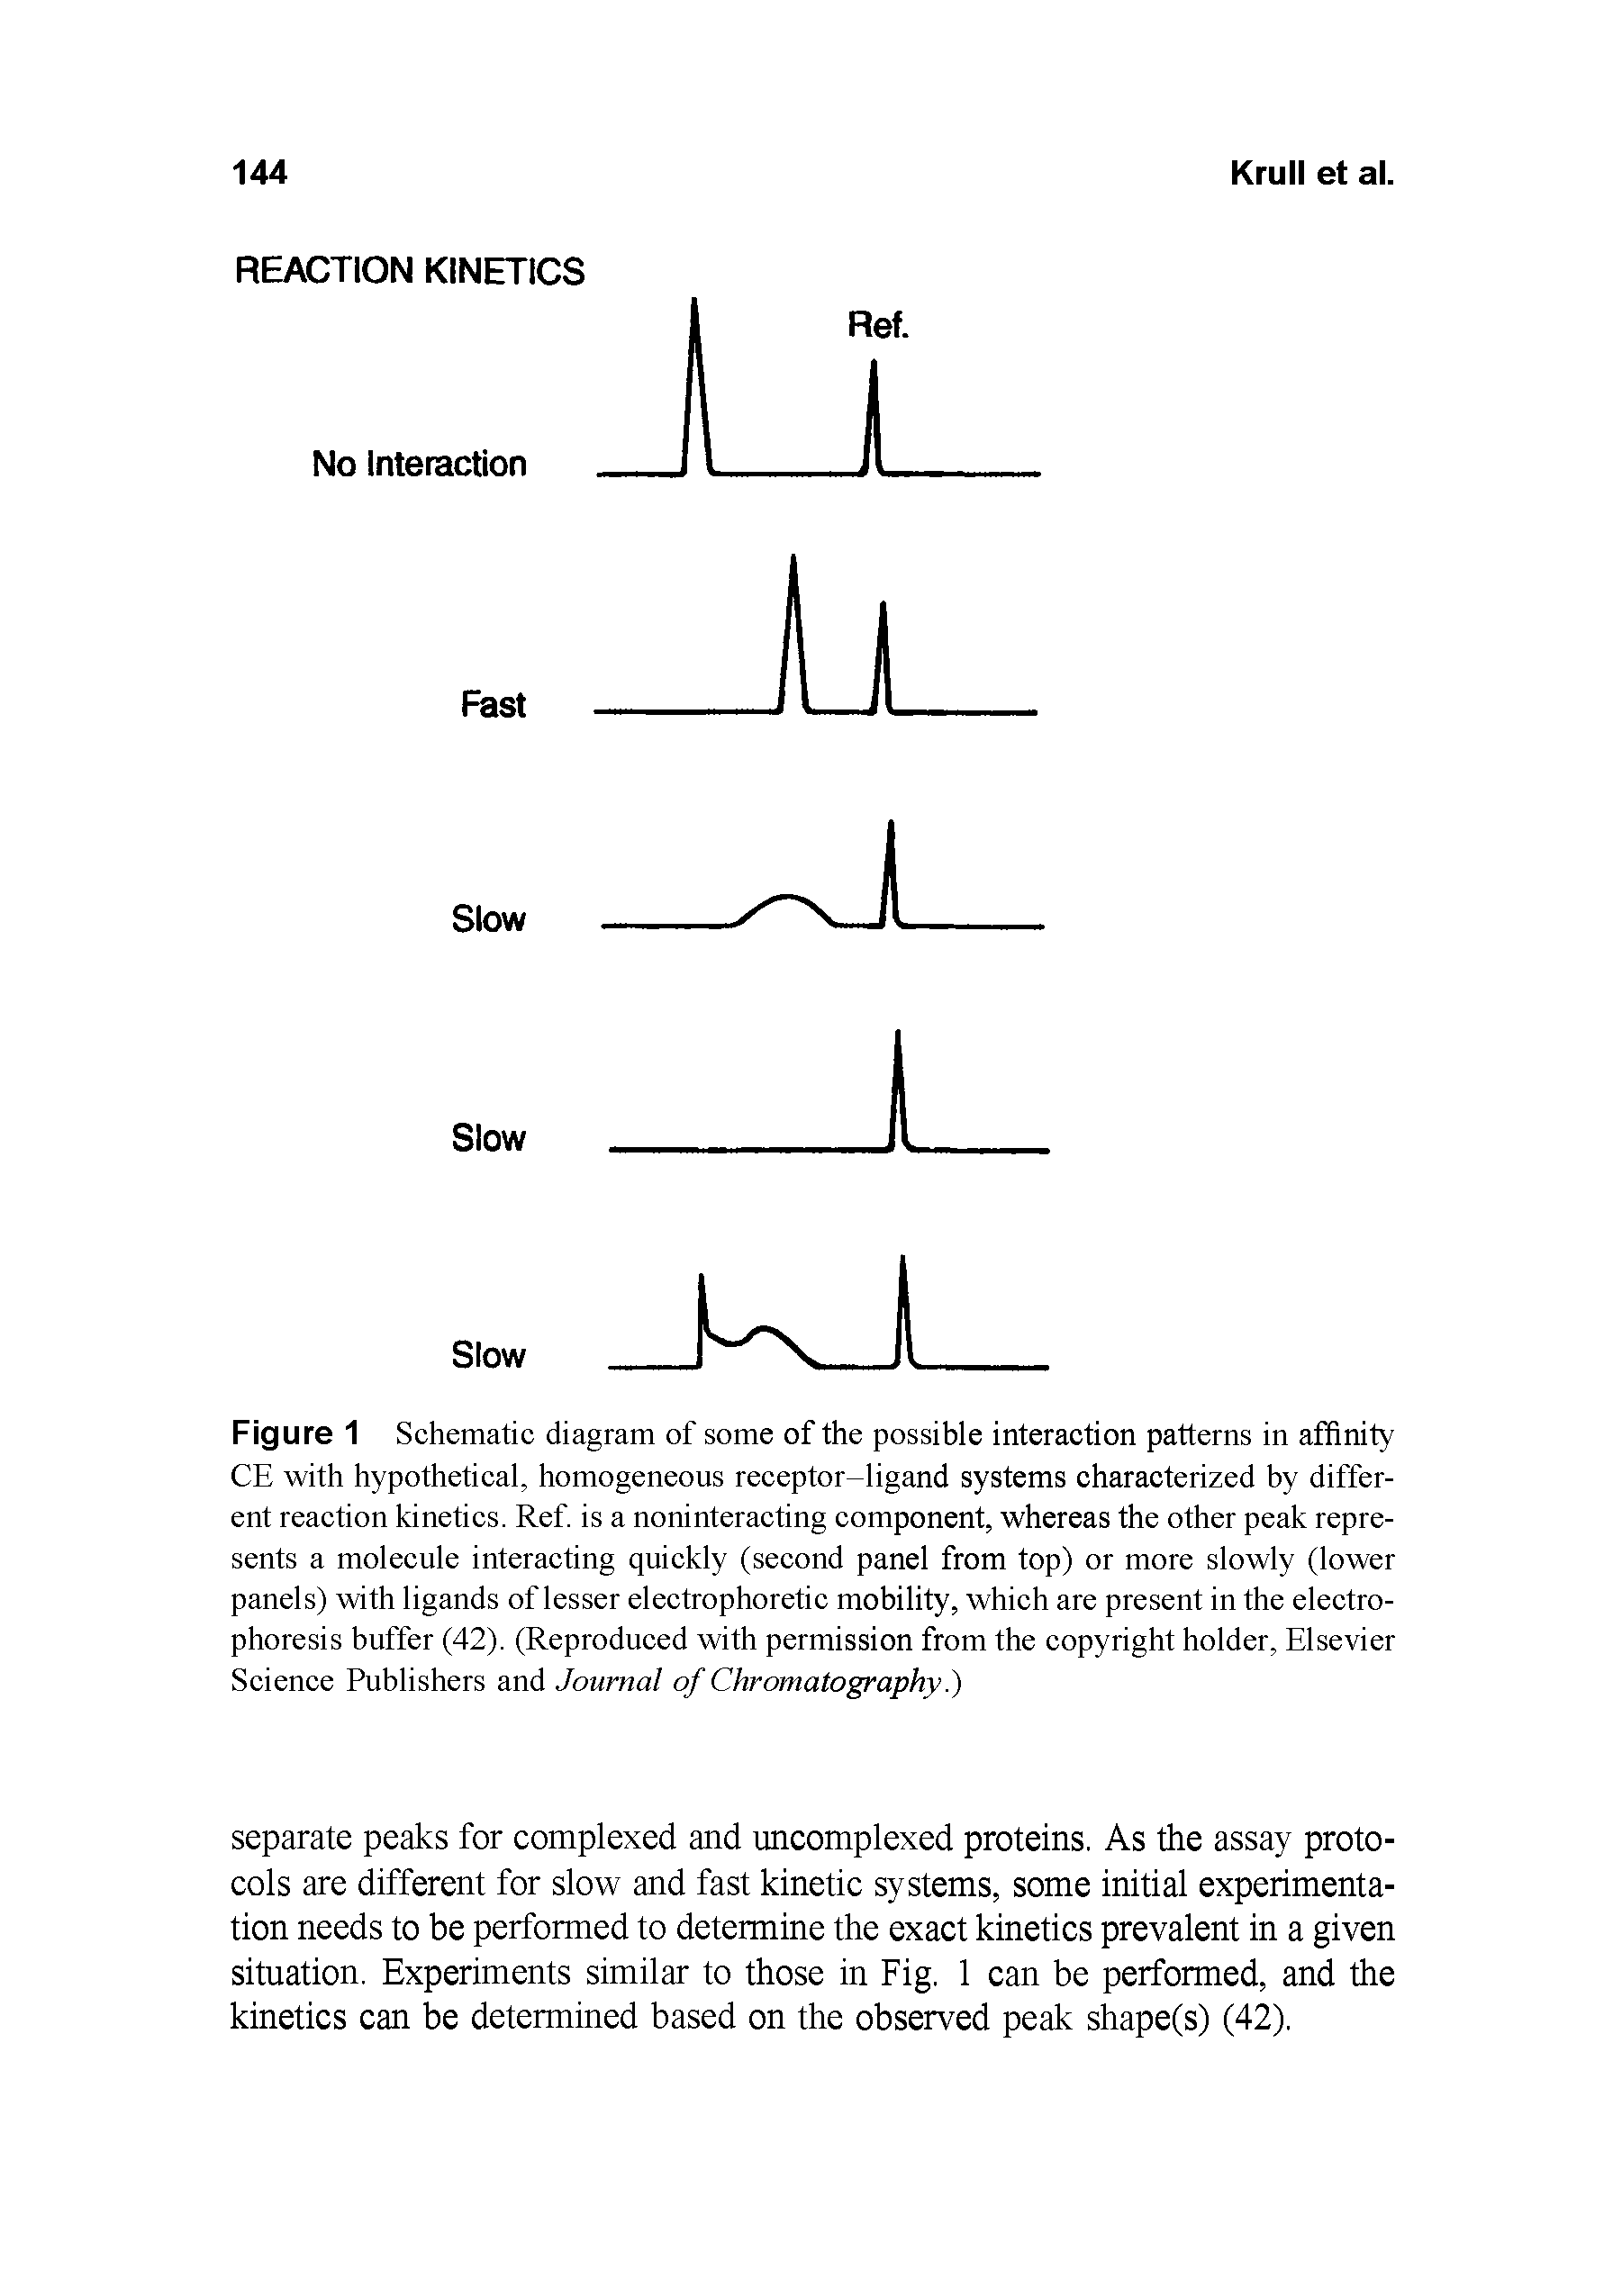 Figure 1 Schematic diagram of some of the possible interaction patterns in affinity CE with hypothetical, homogeneous receptor-ligand systems characterized by different reaction kinetics. Ref. is a noninteracting component, whereas the other peak represents a molecule interacting quickly (second panel from top) or more slowly (lower panels) with ligands of lesser electrophoretic mobility, which are present in the electrophoresis buffer (42). (Reproduced with permission from the copyright holder, Elsevier Science Publishers and Journal of Chromatography. )...